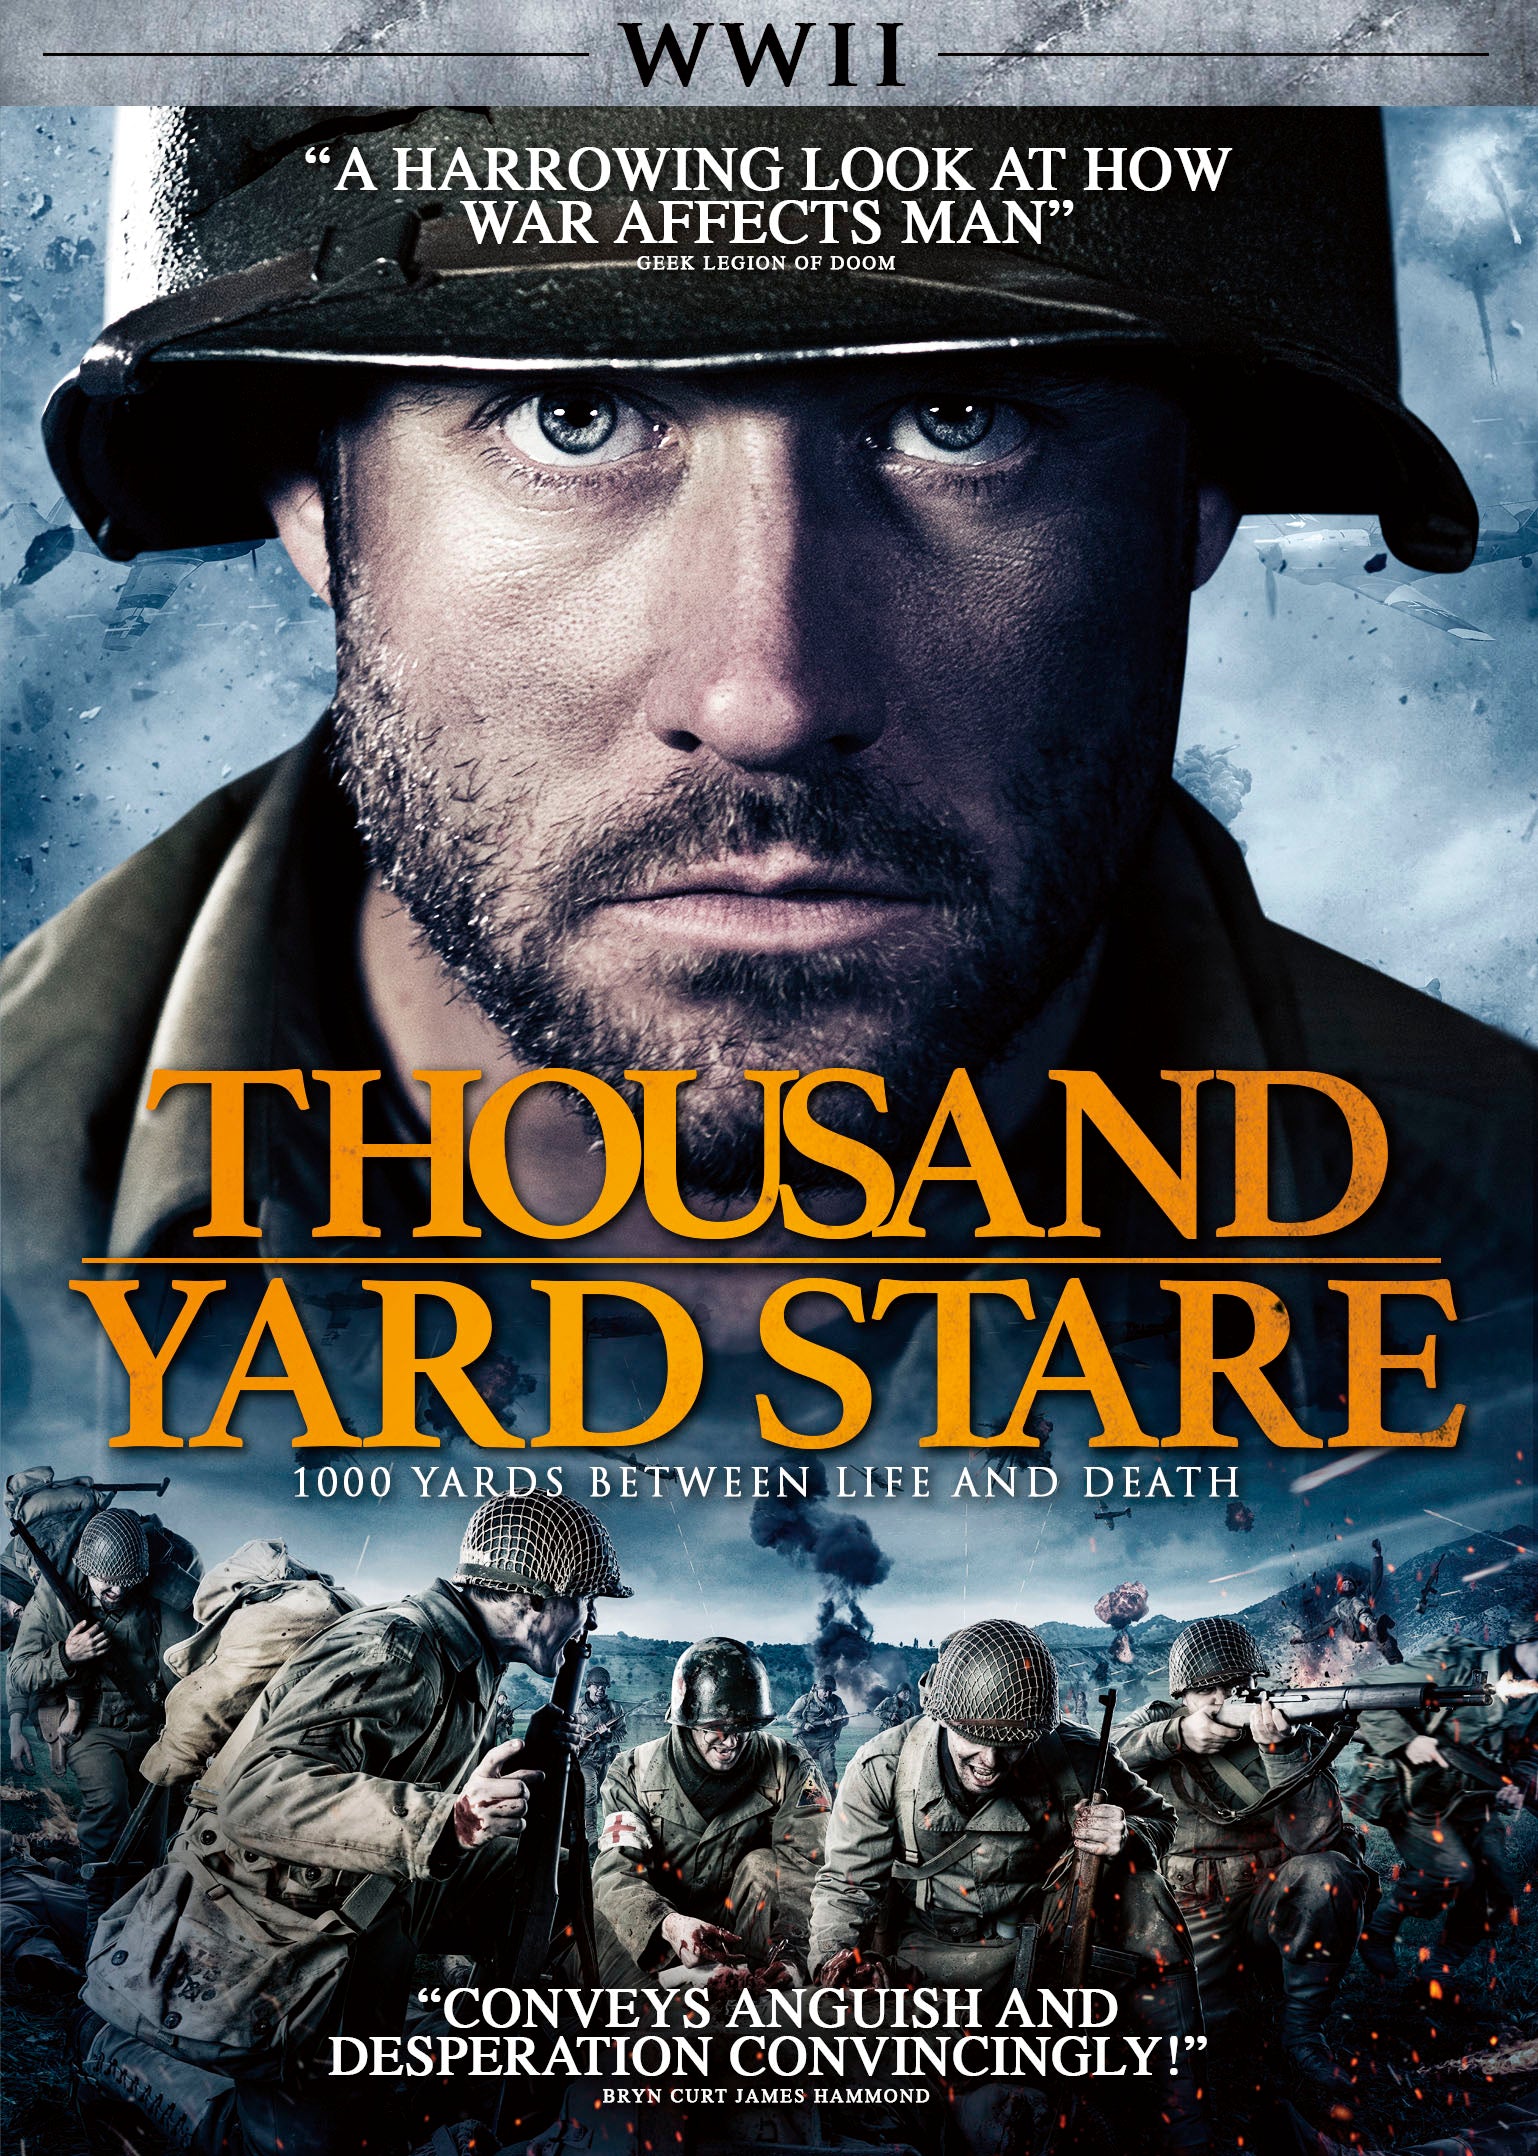 Thousand Yard Stare cover art